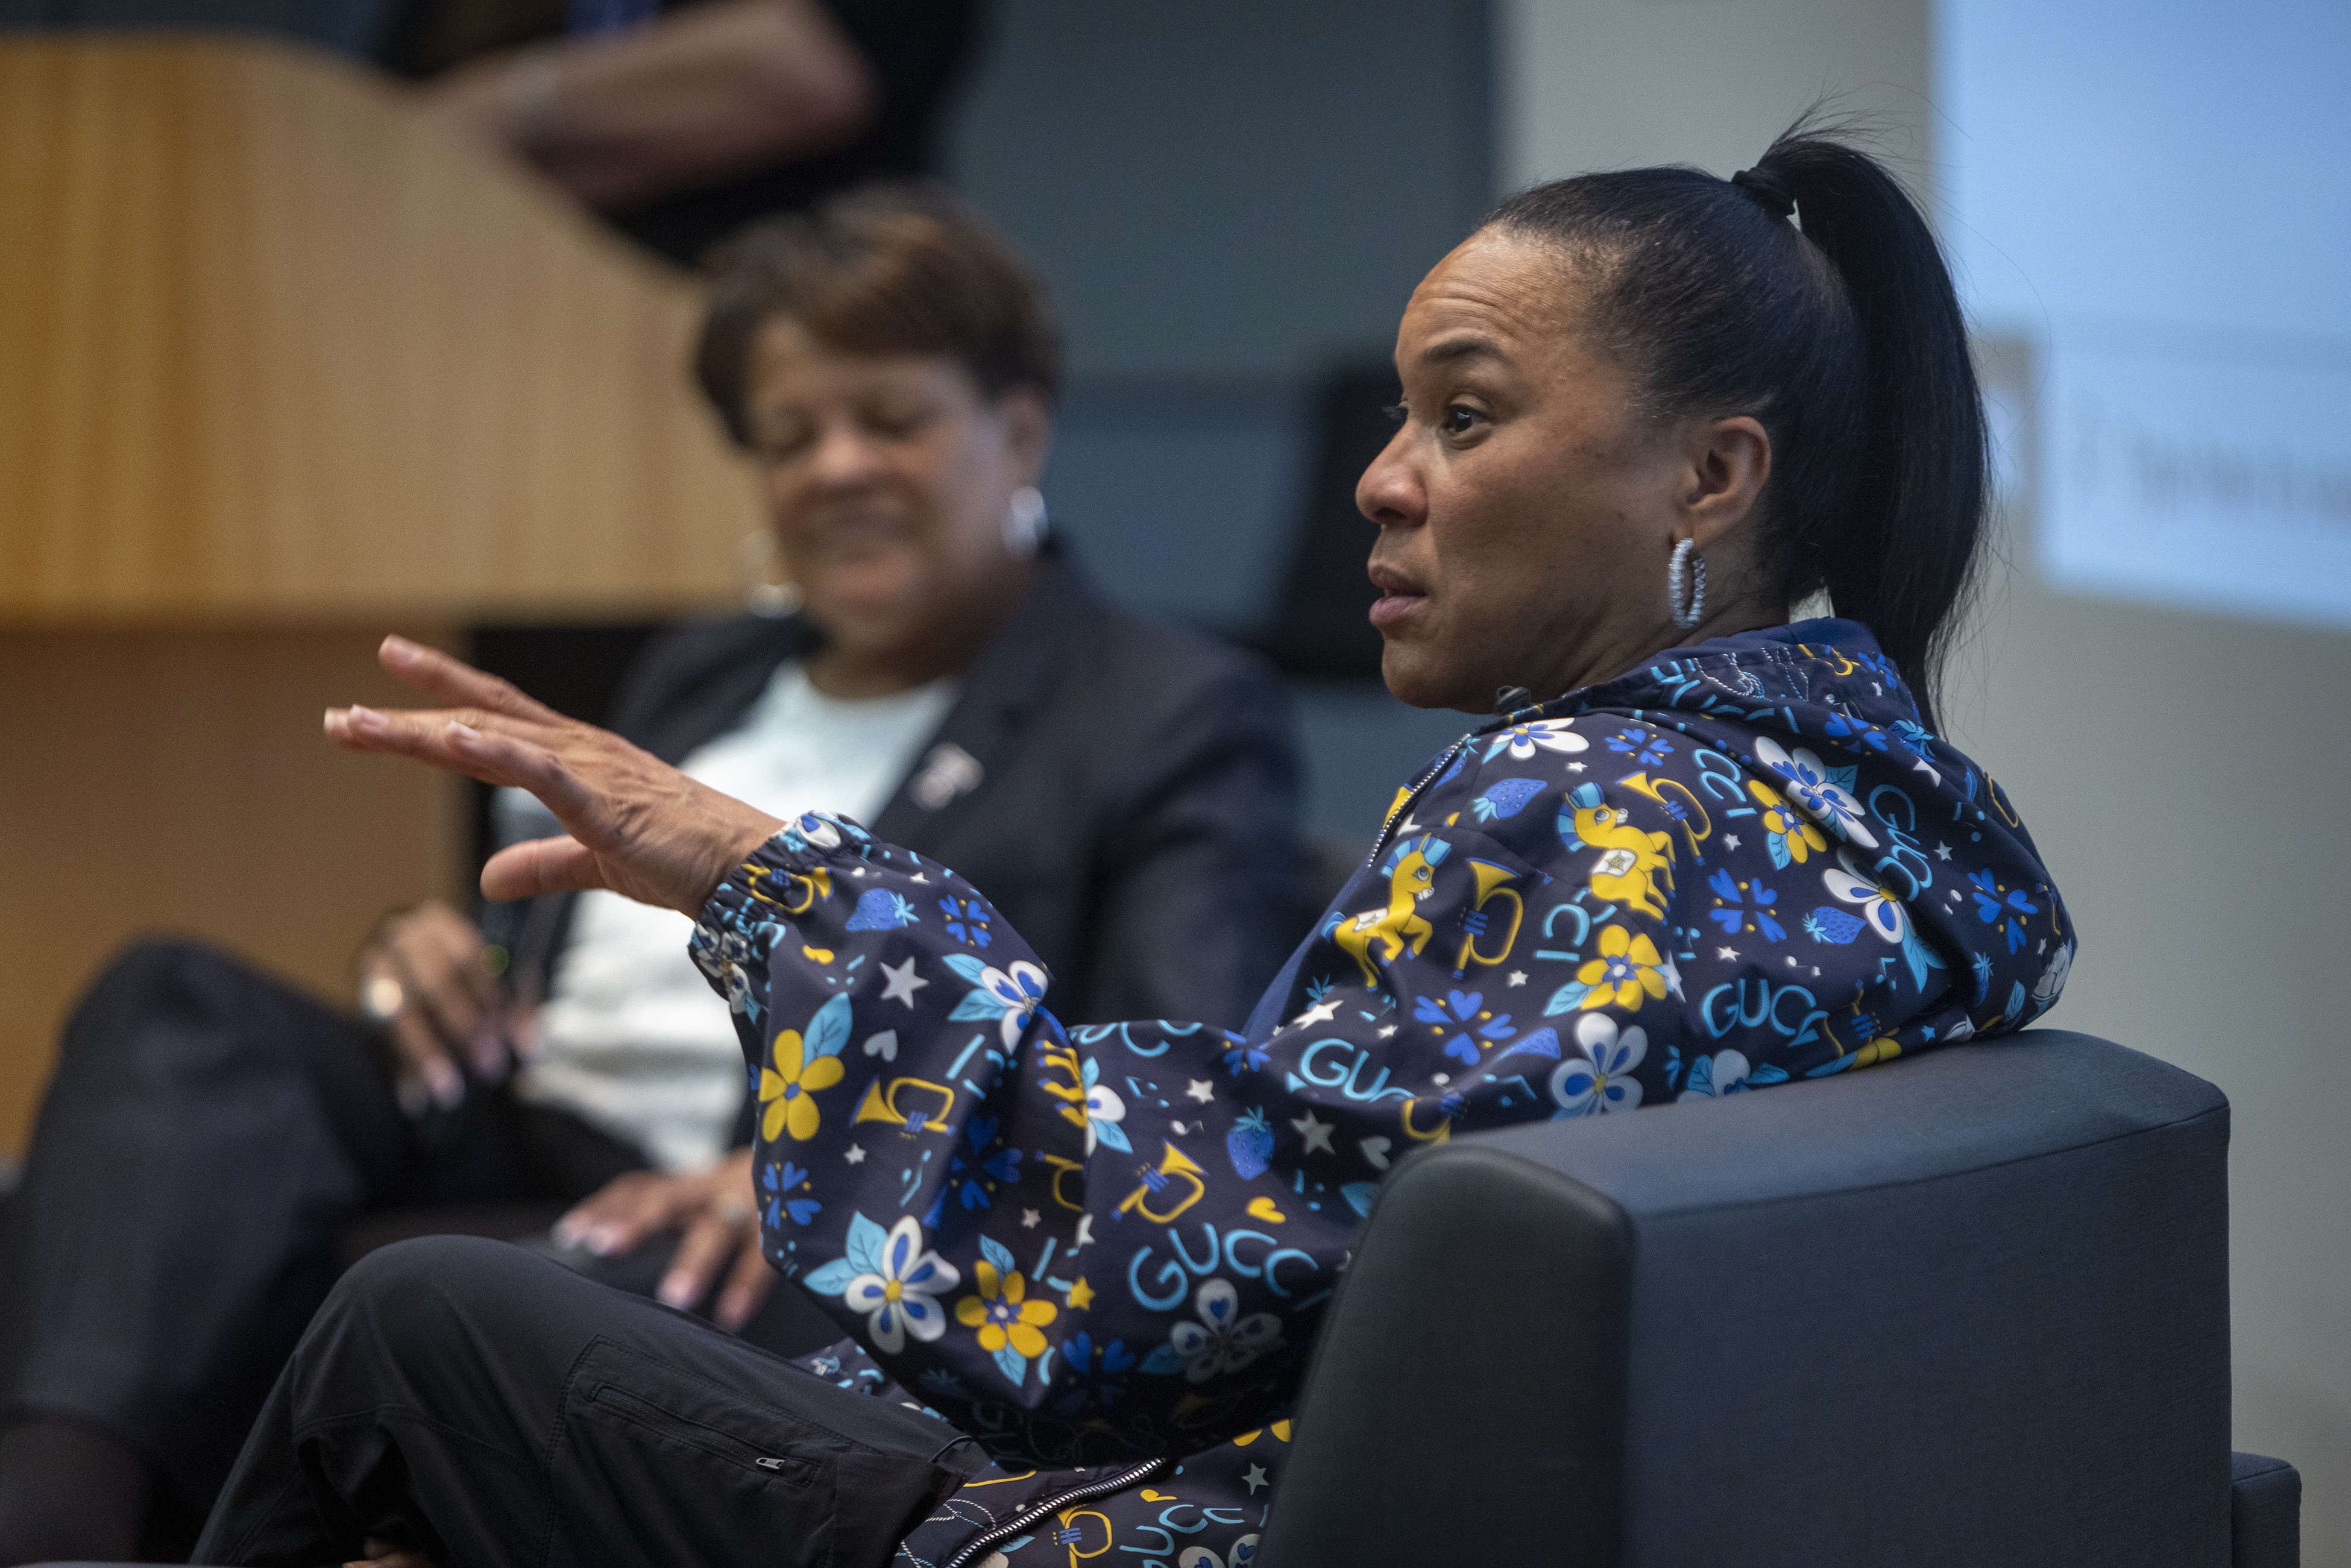 Dawn Staley on the increase in TV viewership for women's sports